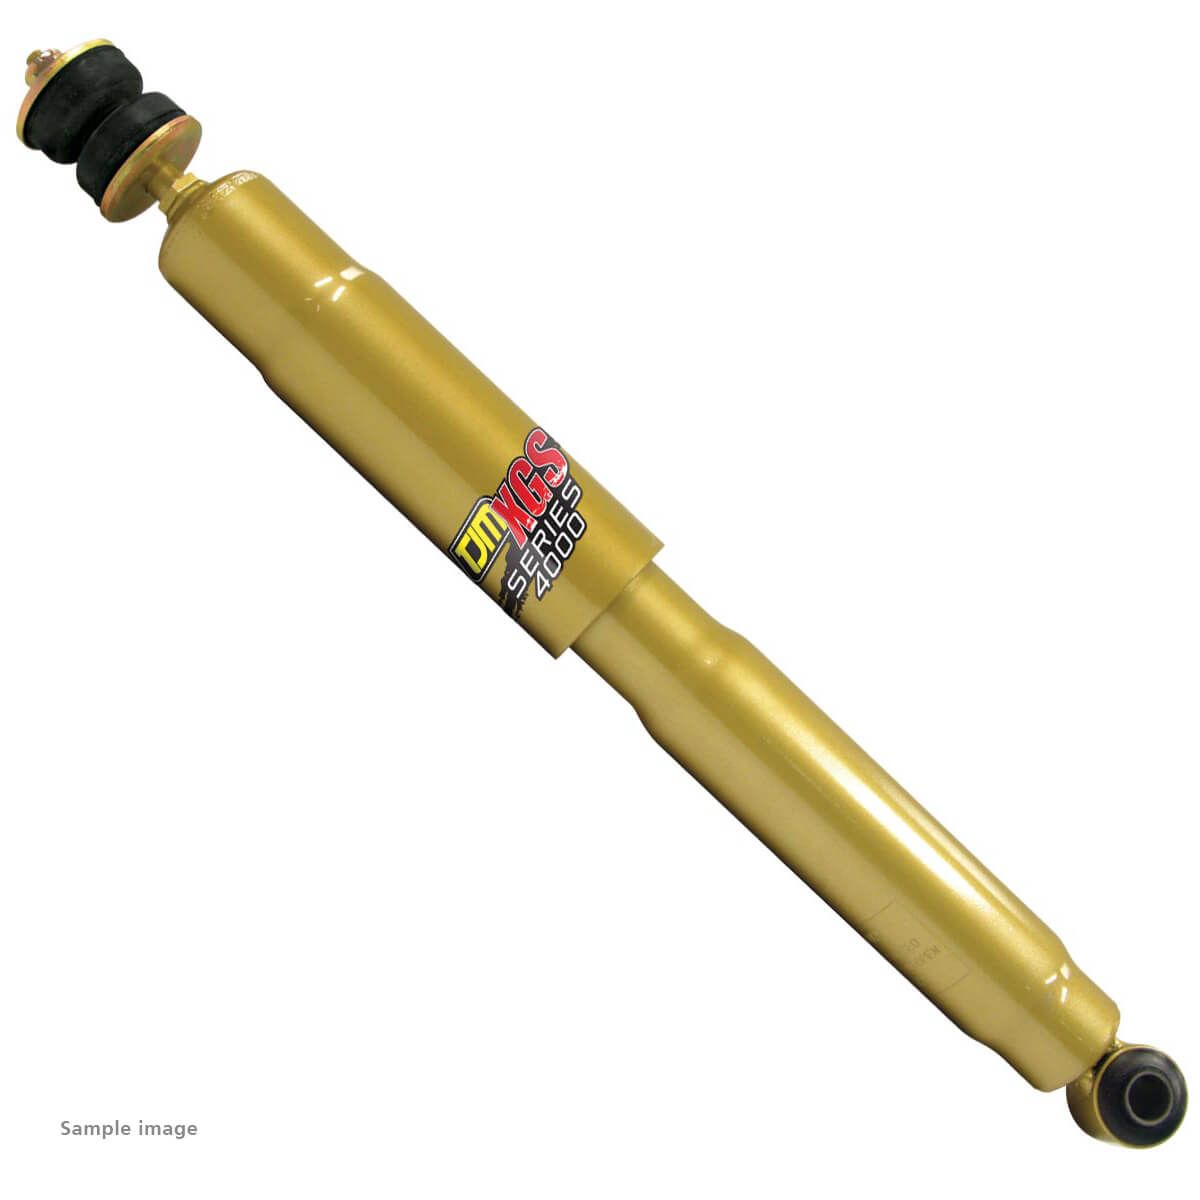 Information about TJM XGS GOLD EDITION SHOCK SERIES 80 RW